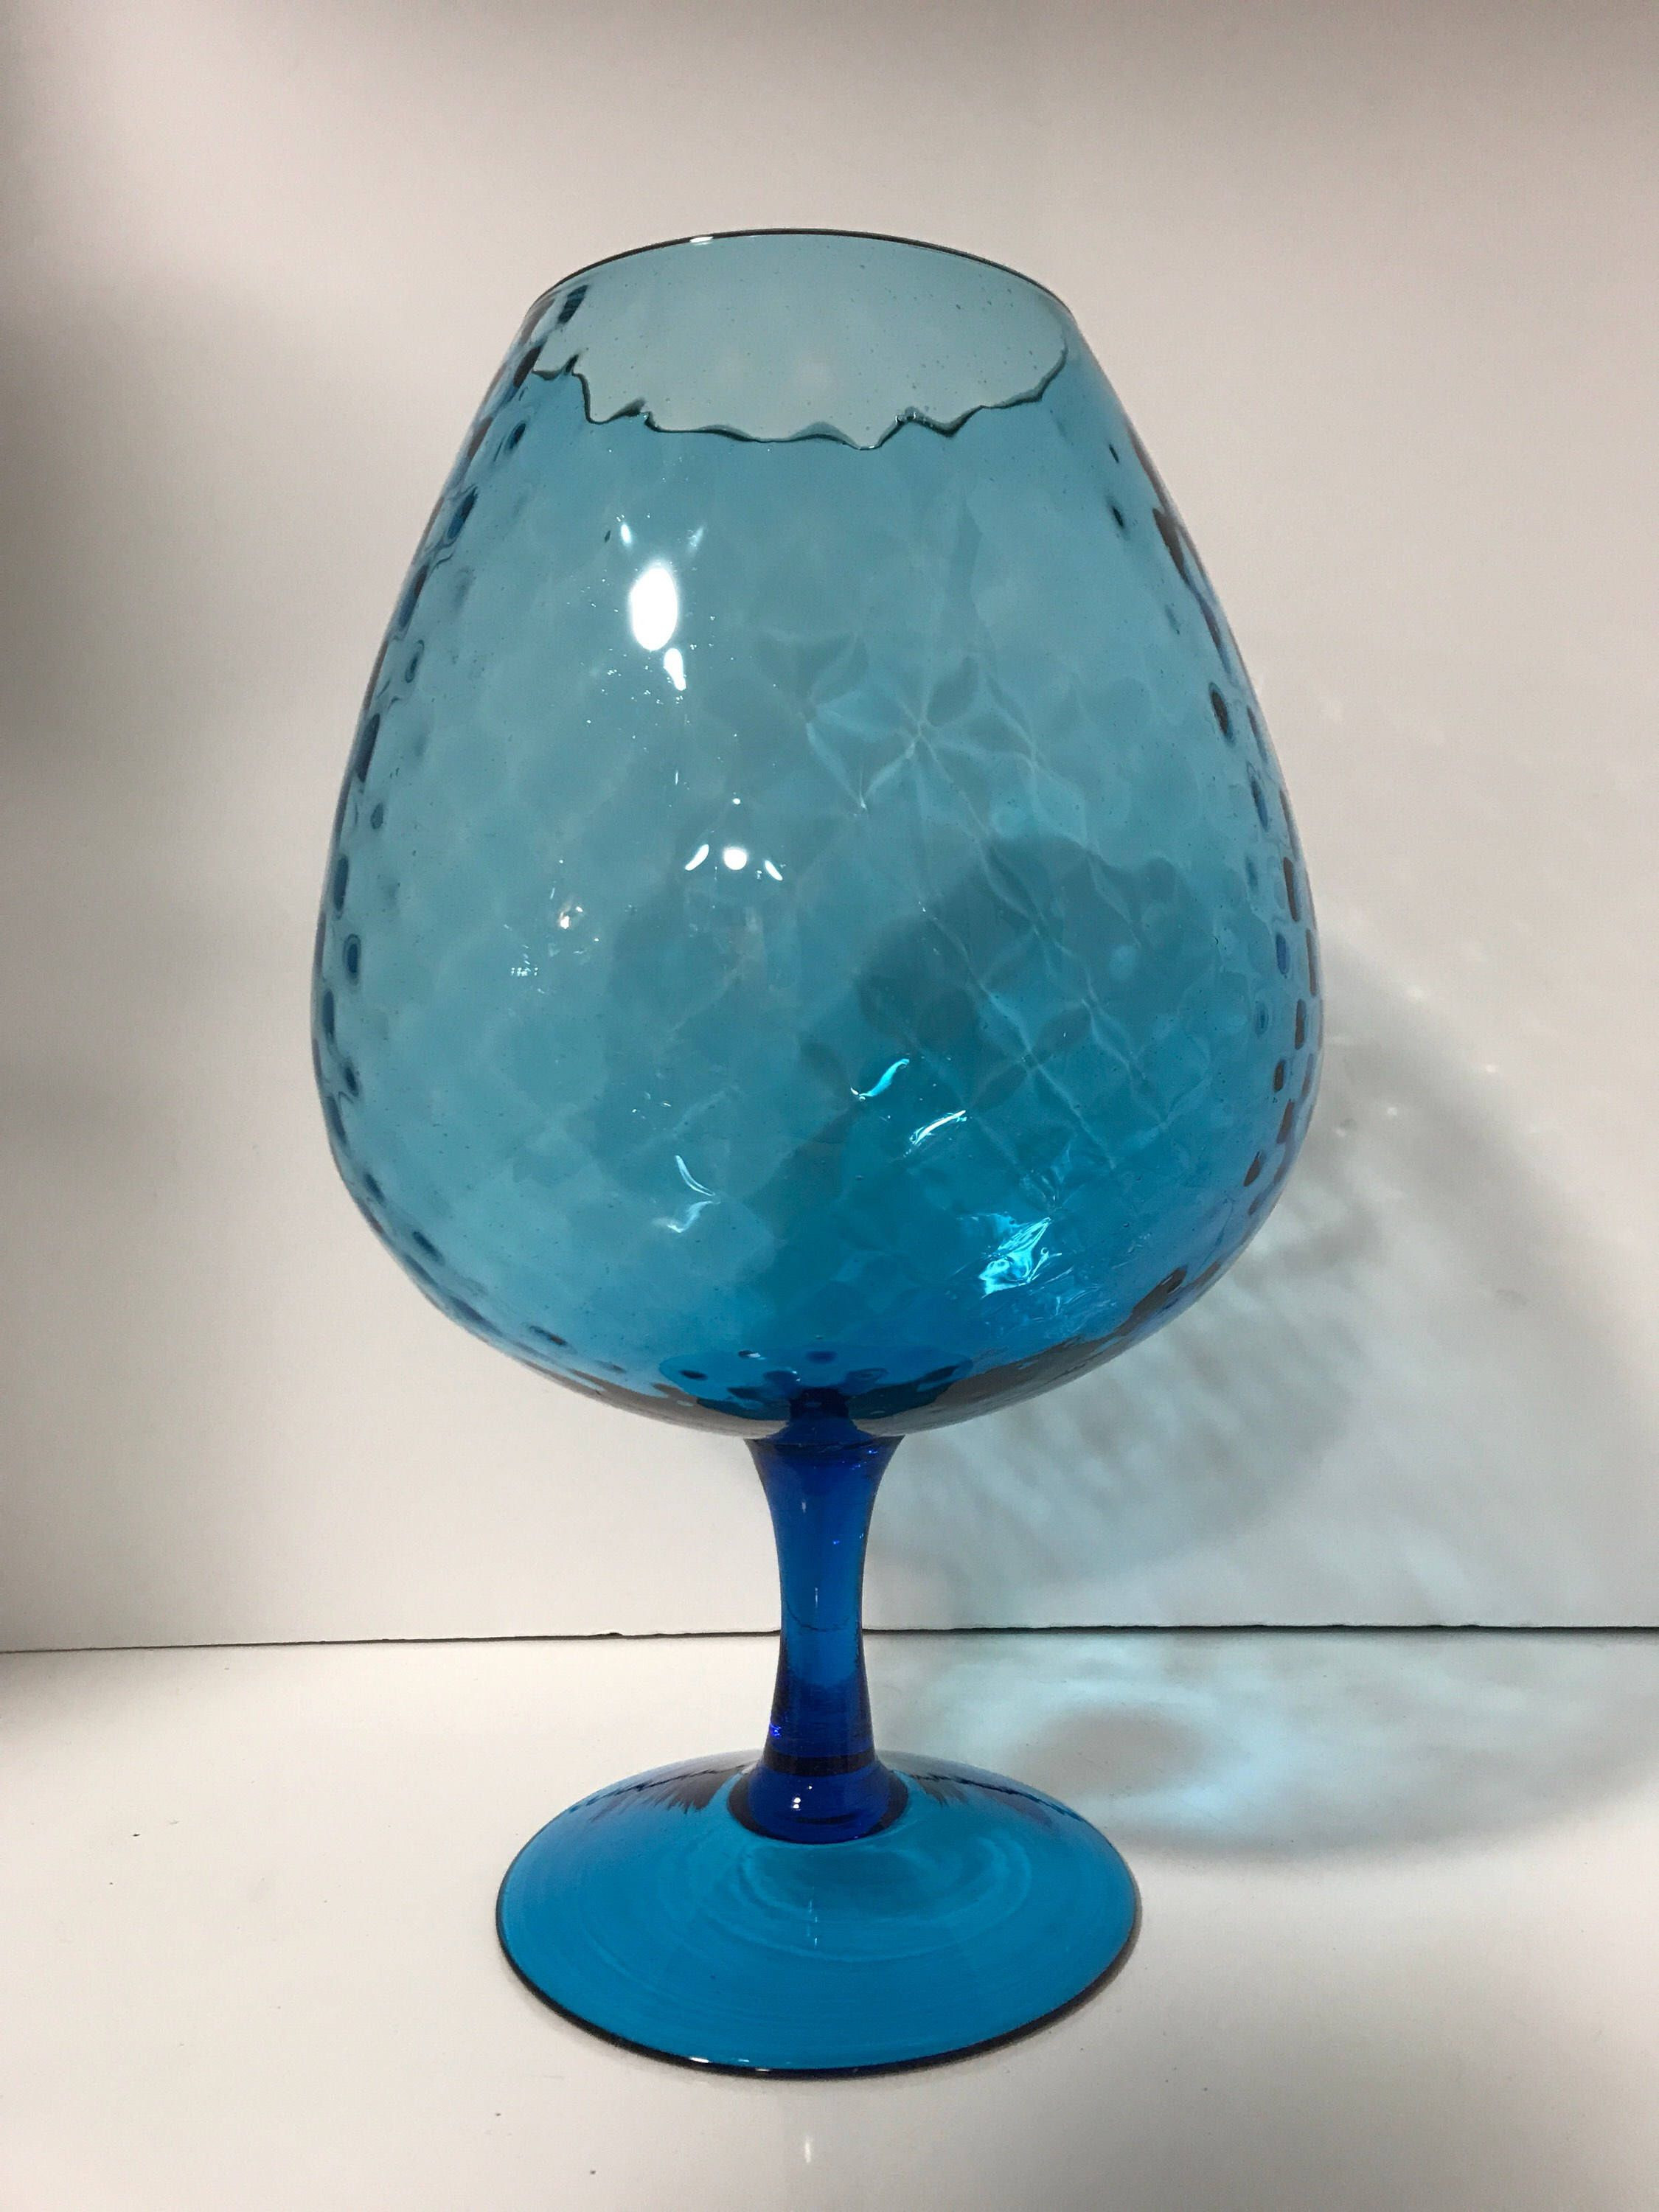 extra large wine glass vase of vintage blue empoli glass snifter style vase blue diamond optic throughout a personal favorite from my etsy shop https www etsy com listing 589594501 vintage blue empoli glass snifter style